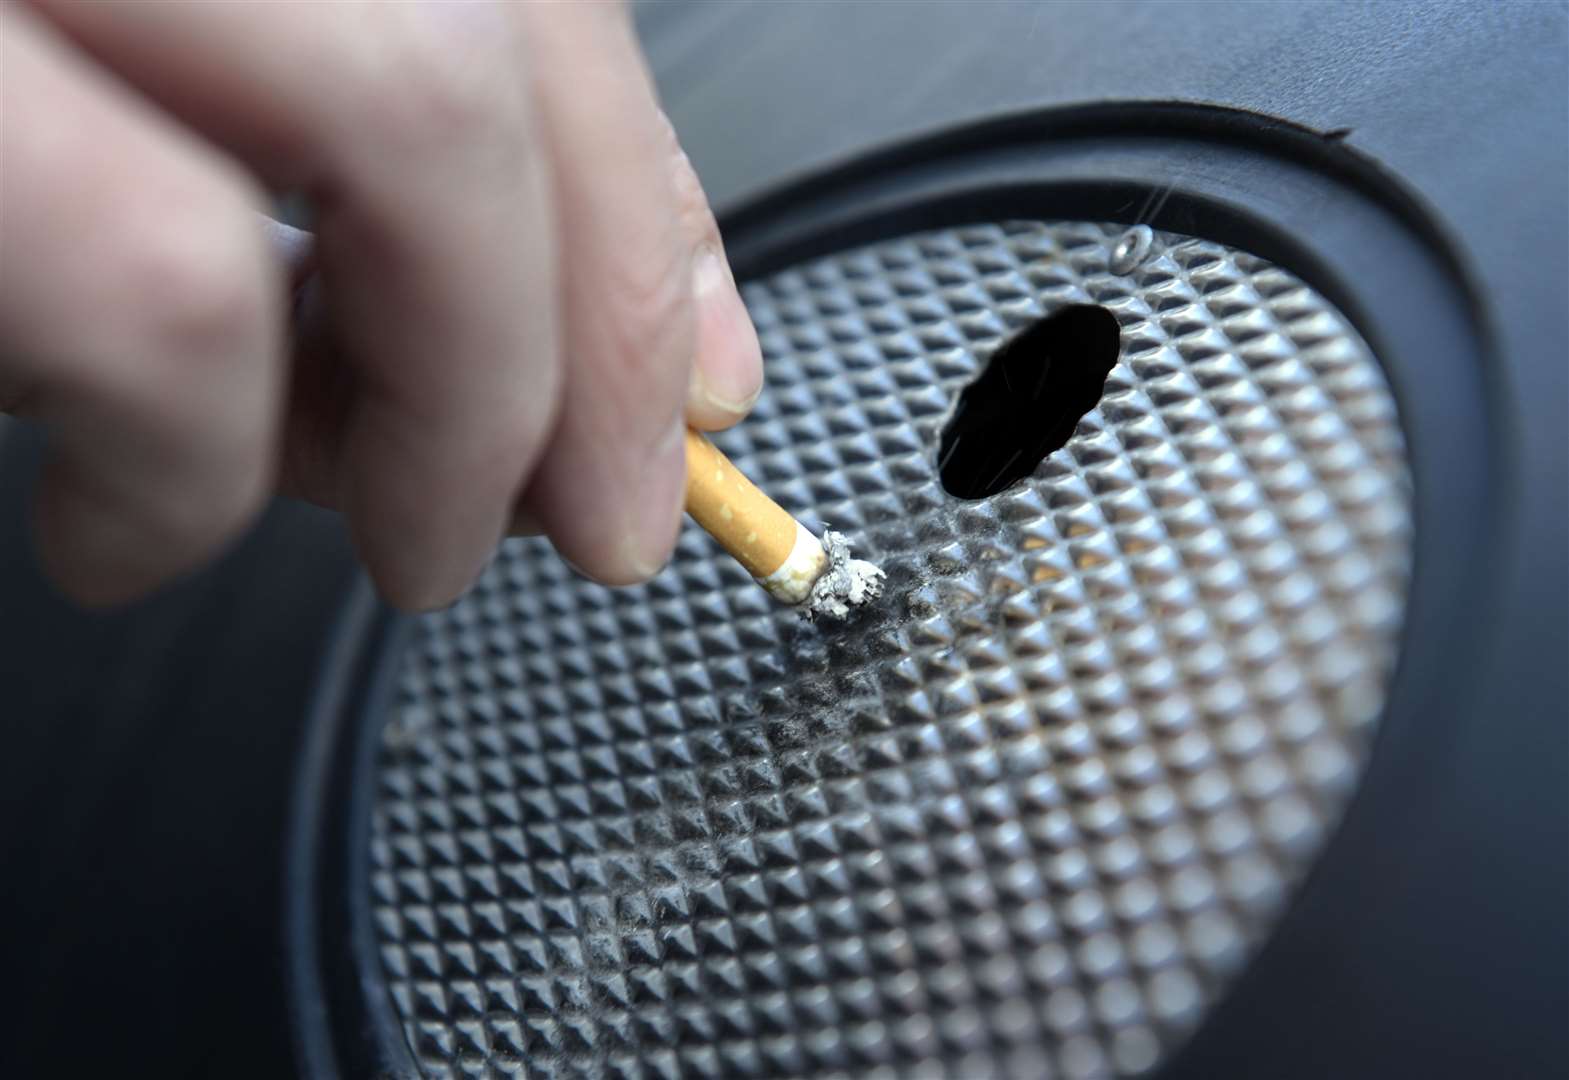 Thanet has the second highest smoking rate in the county and has also seen an increase in one year